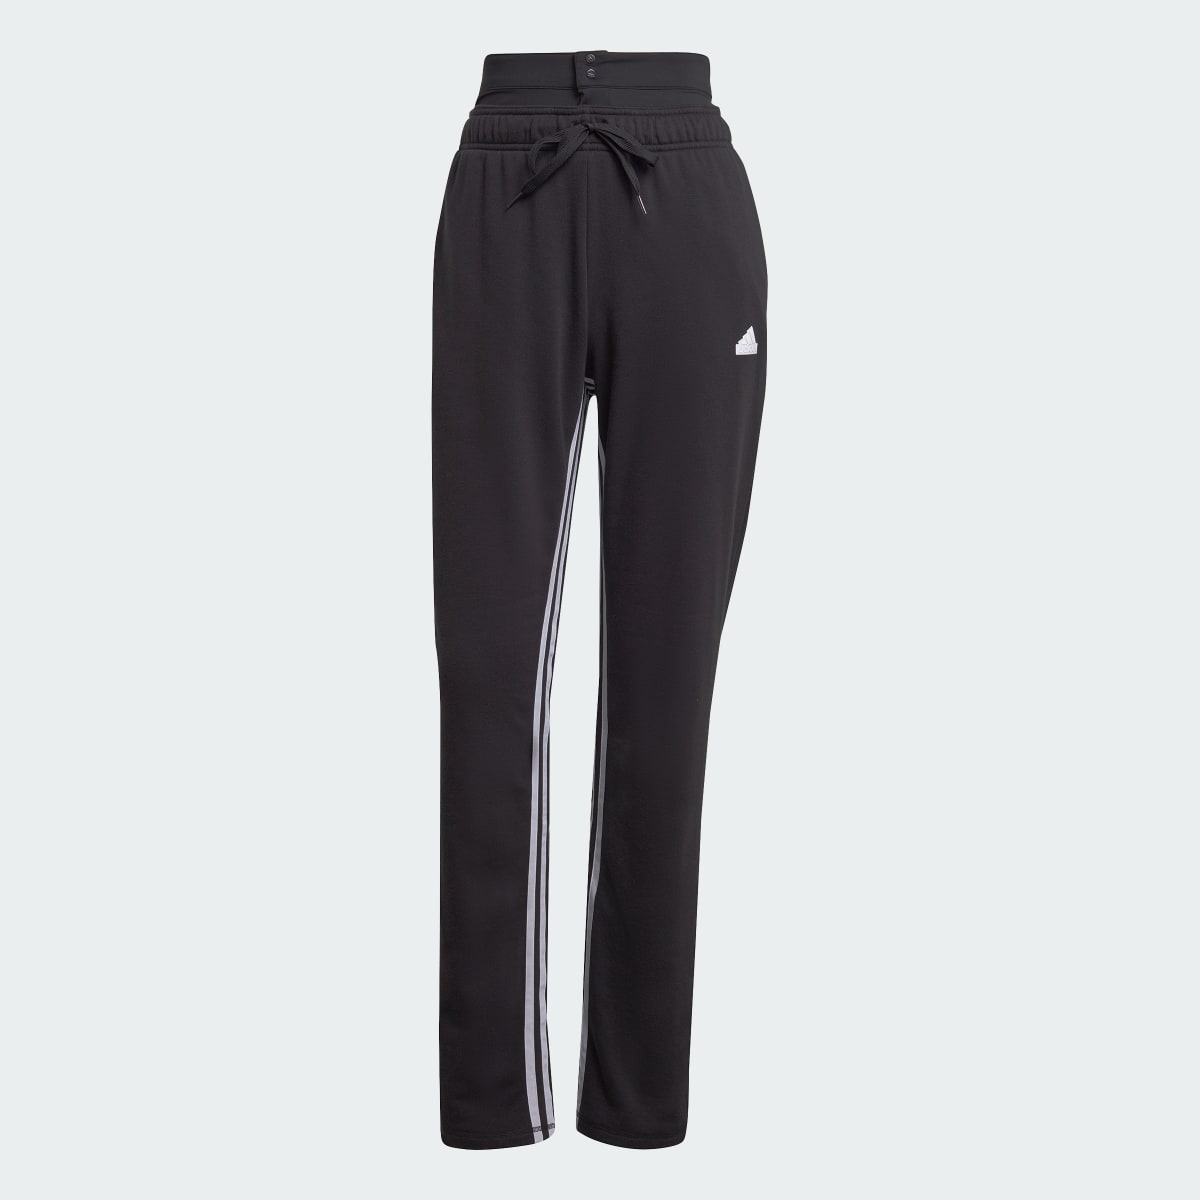 Adidas Express All-Gender Anti-Microbial Joggers. 4